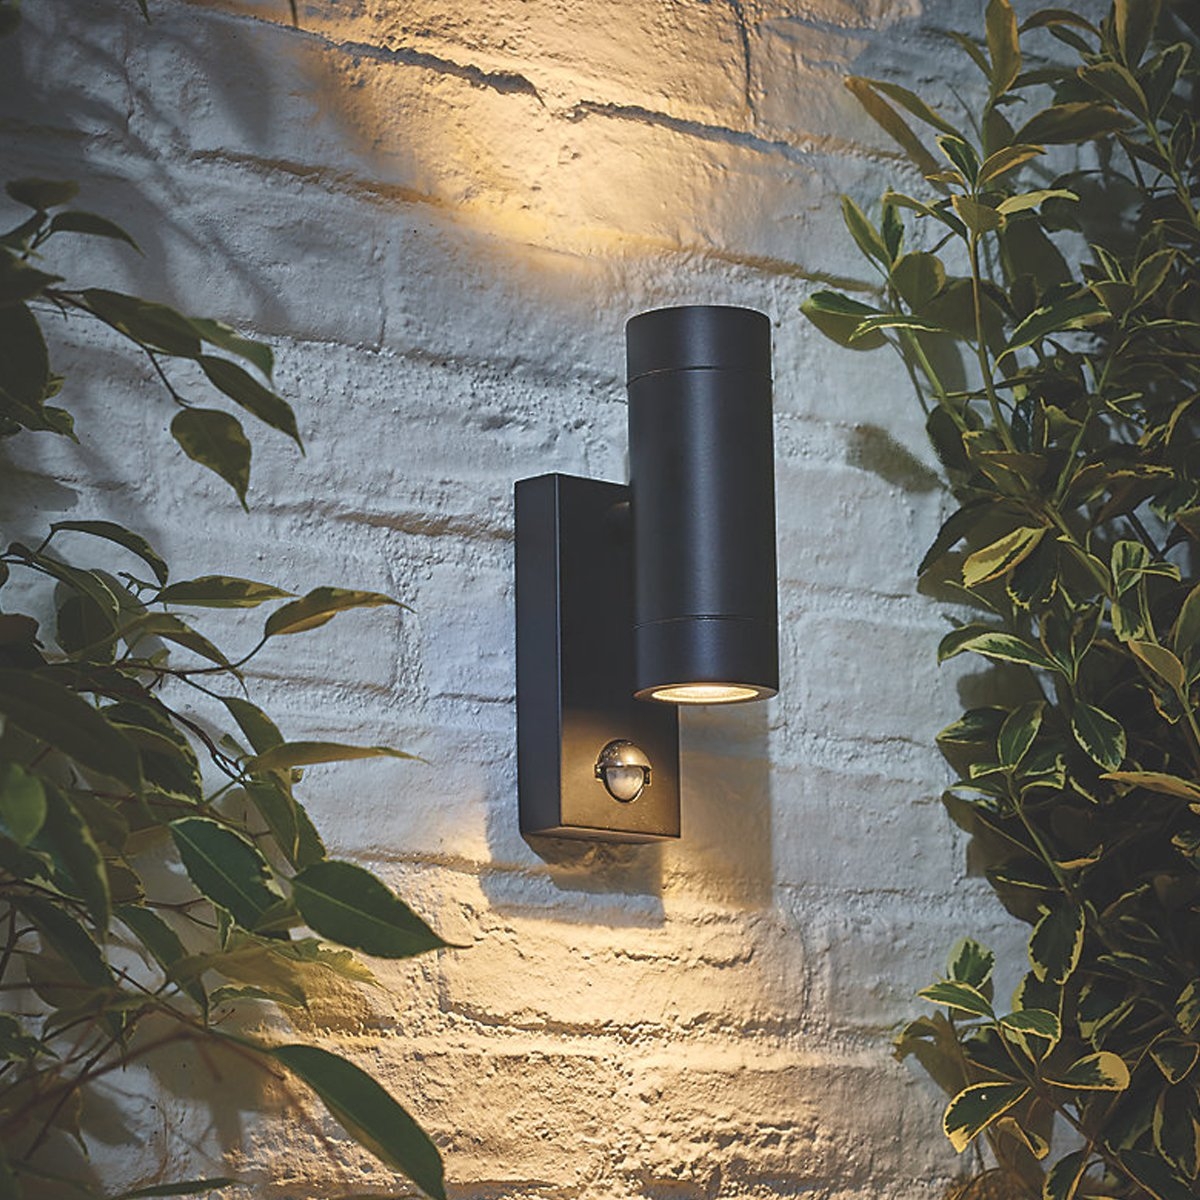 Dual Outdoor Wall Light With Motion Sensor Black – CGC Retail Outlet